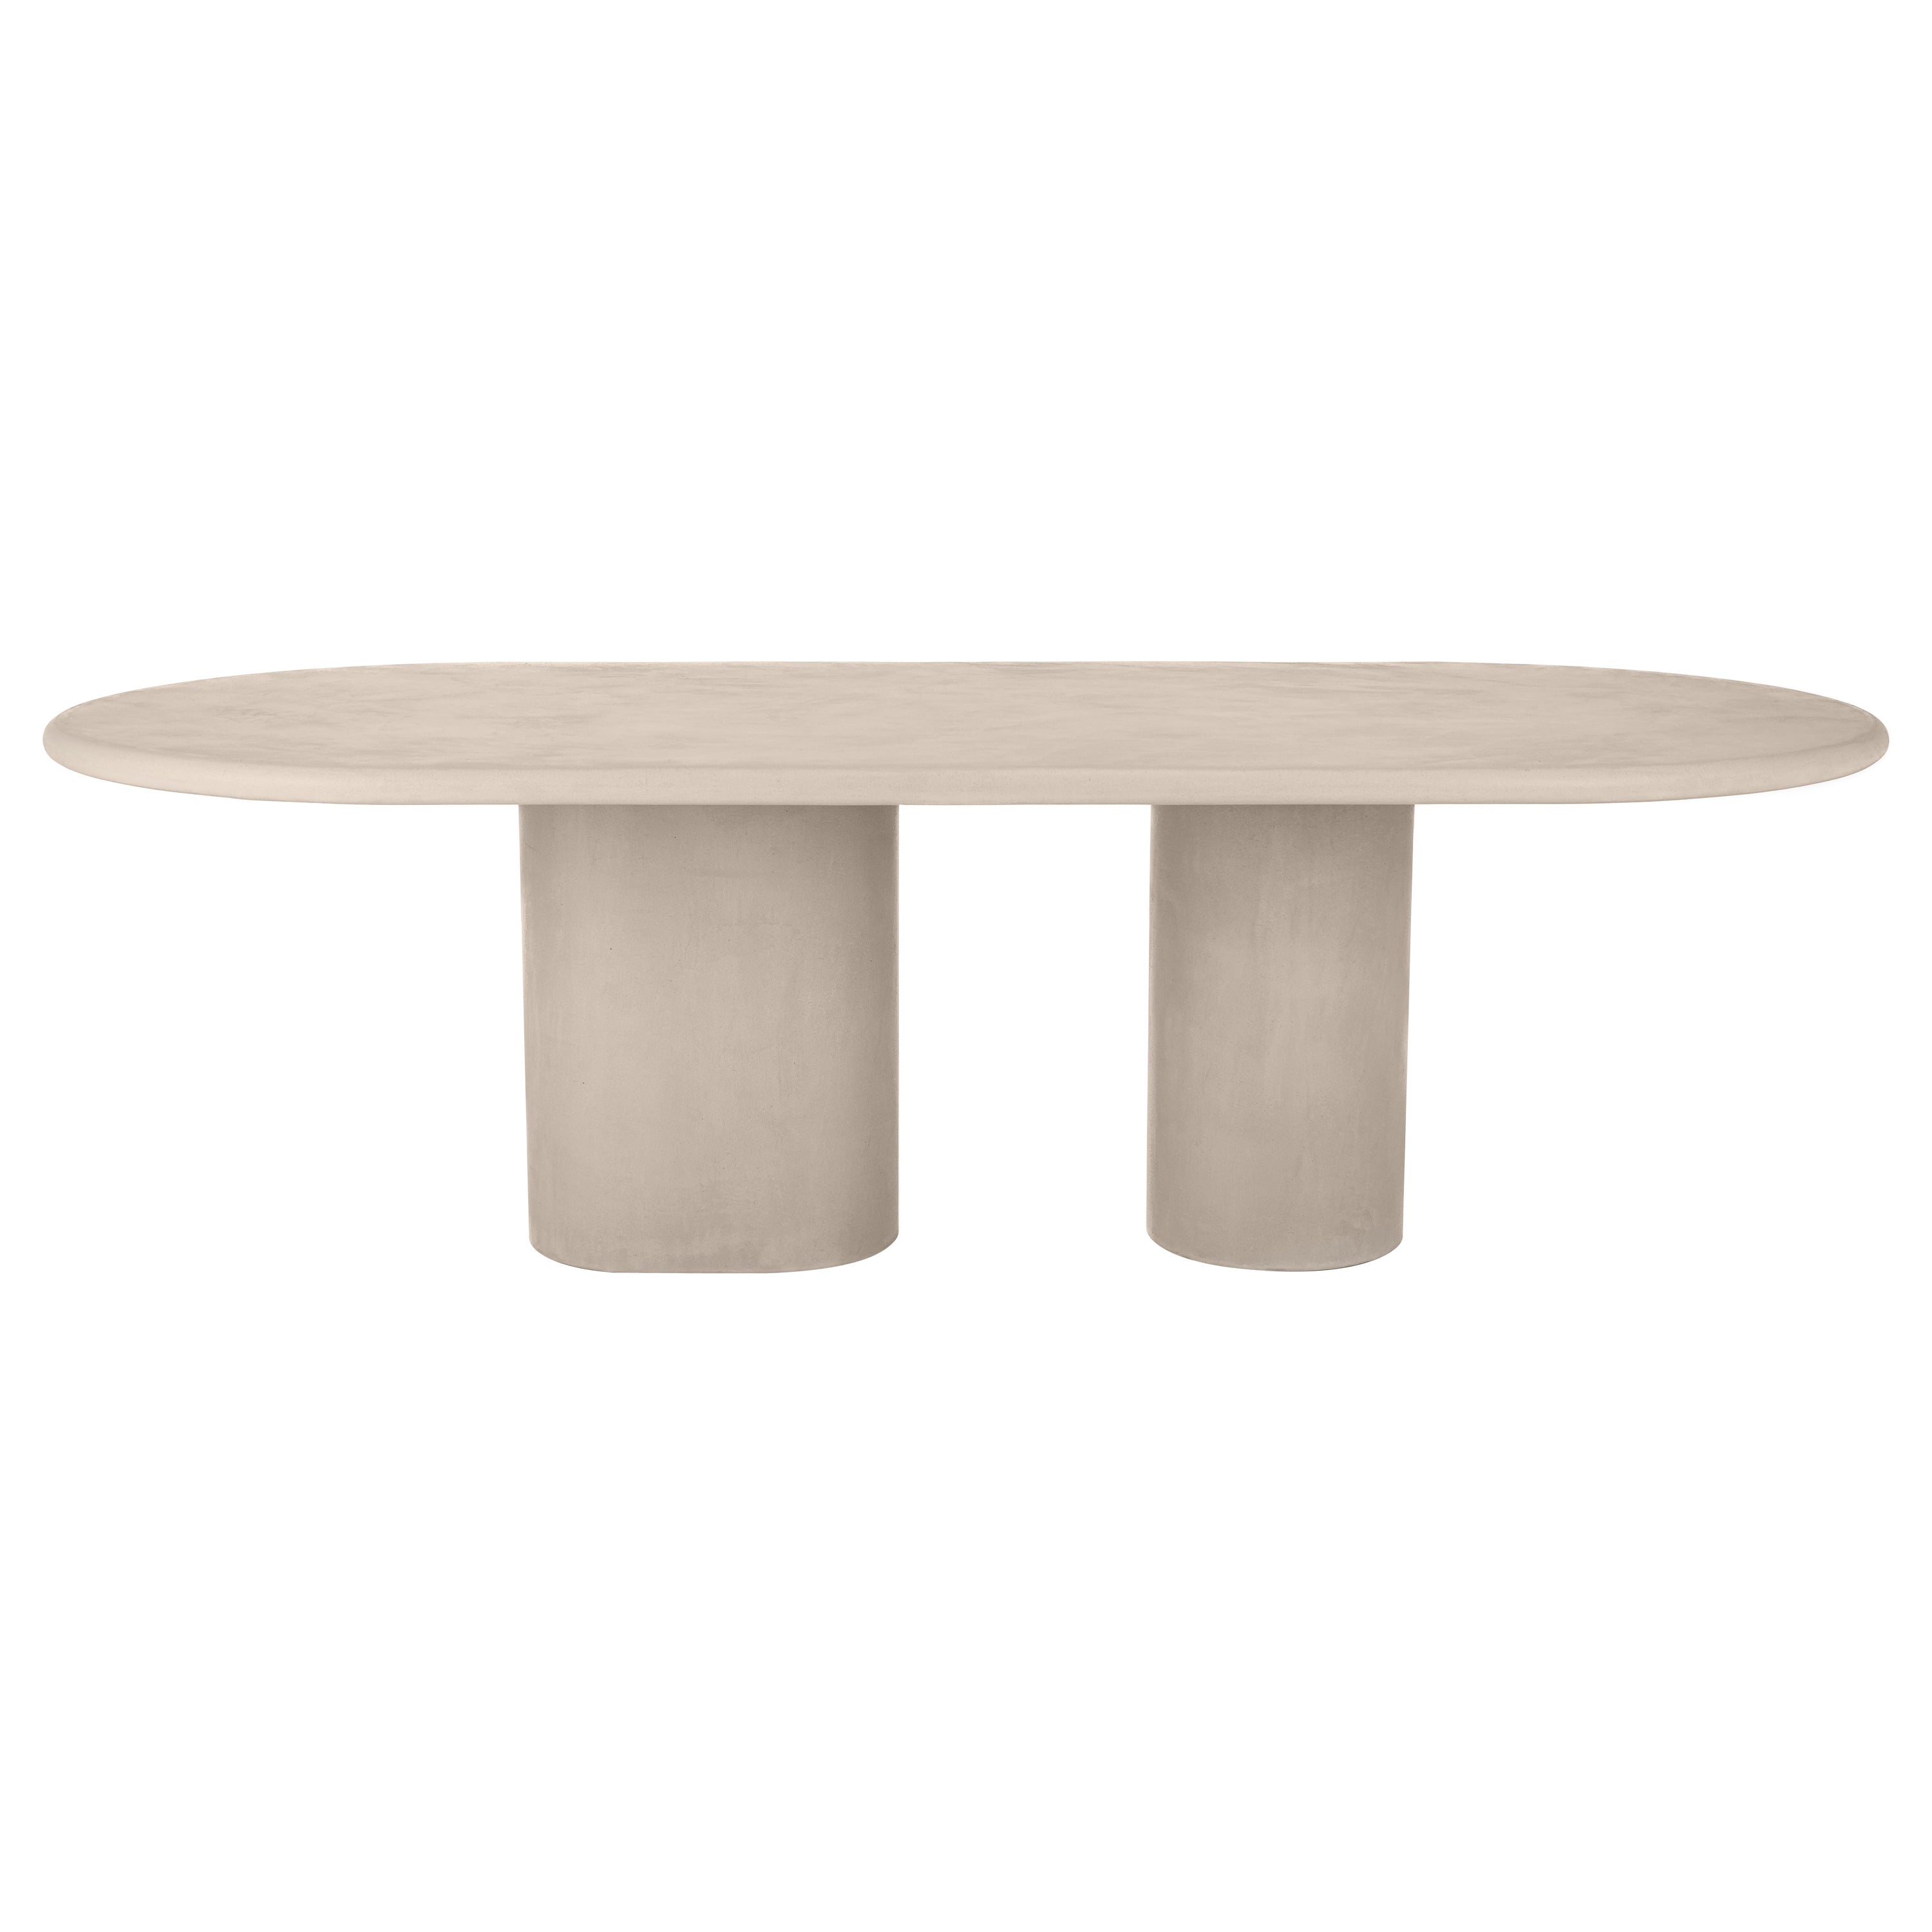 Contemporary Rounded Natural Plaster "Column" Table 240 cm by Isabelle Beaumont For Sale